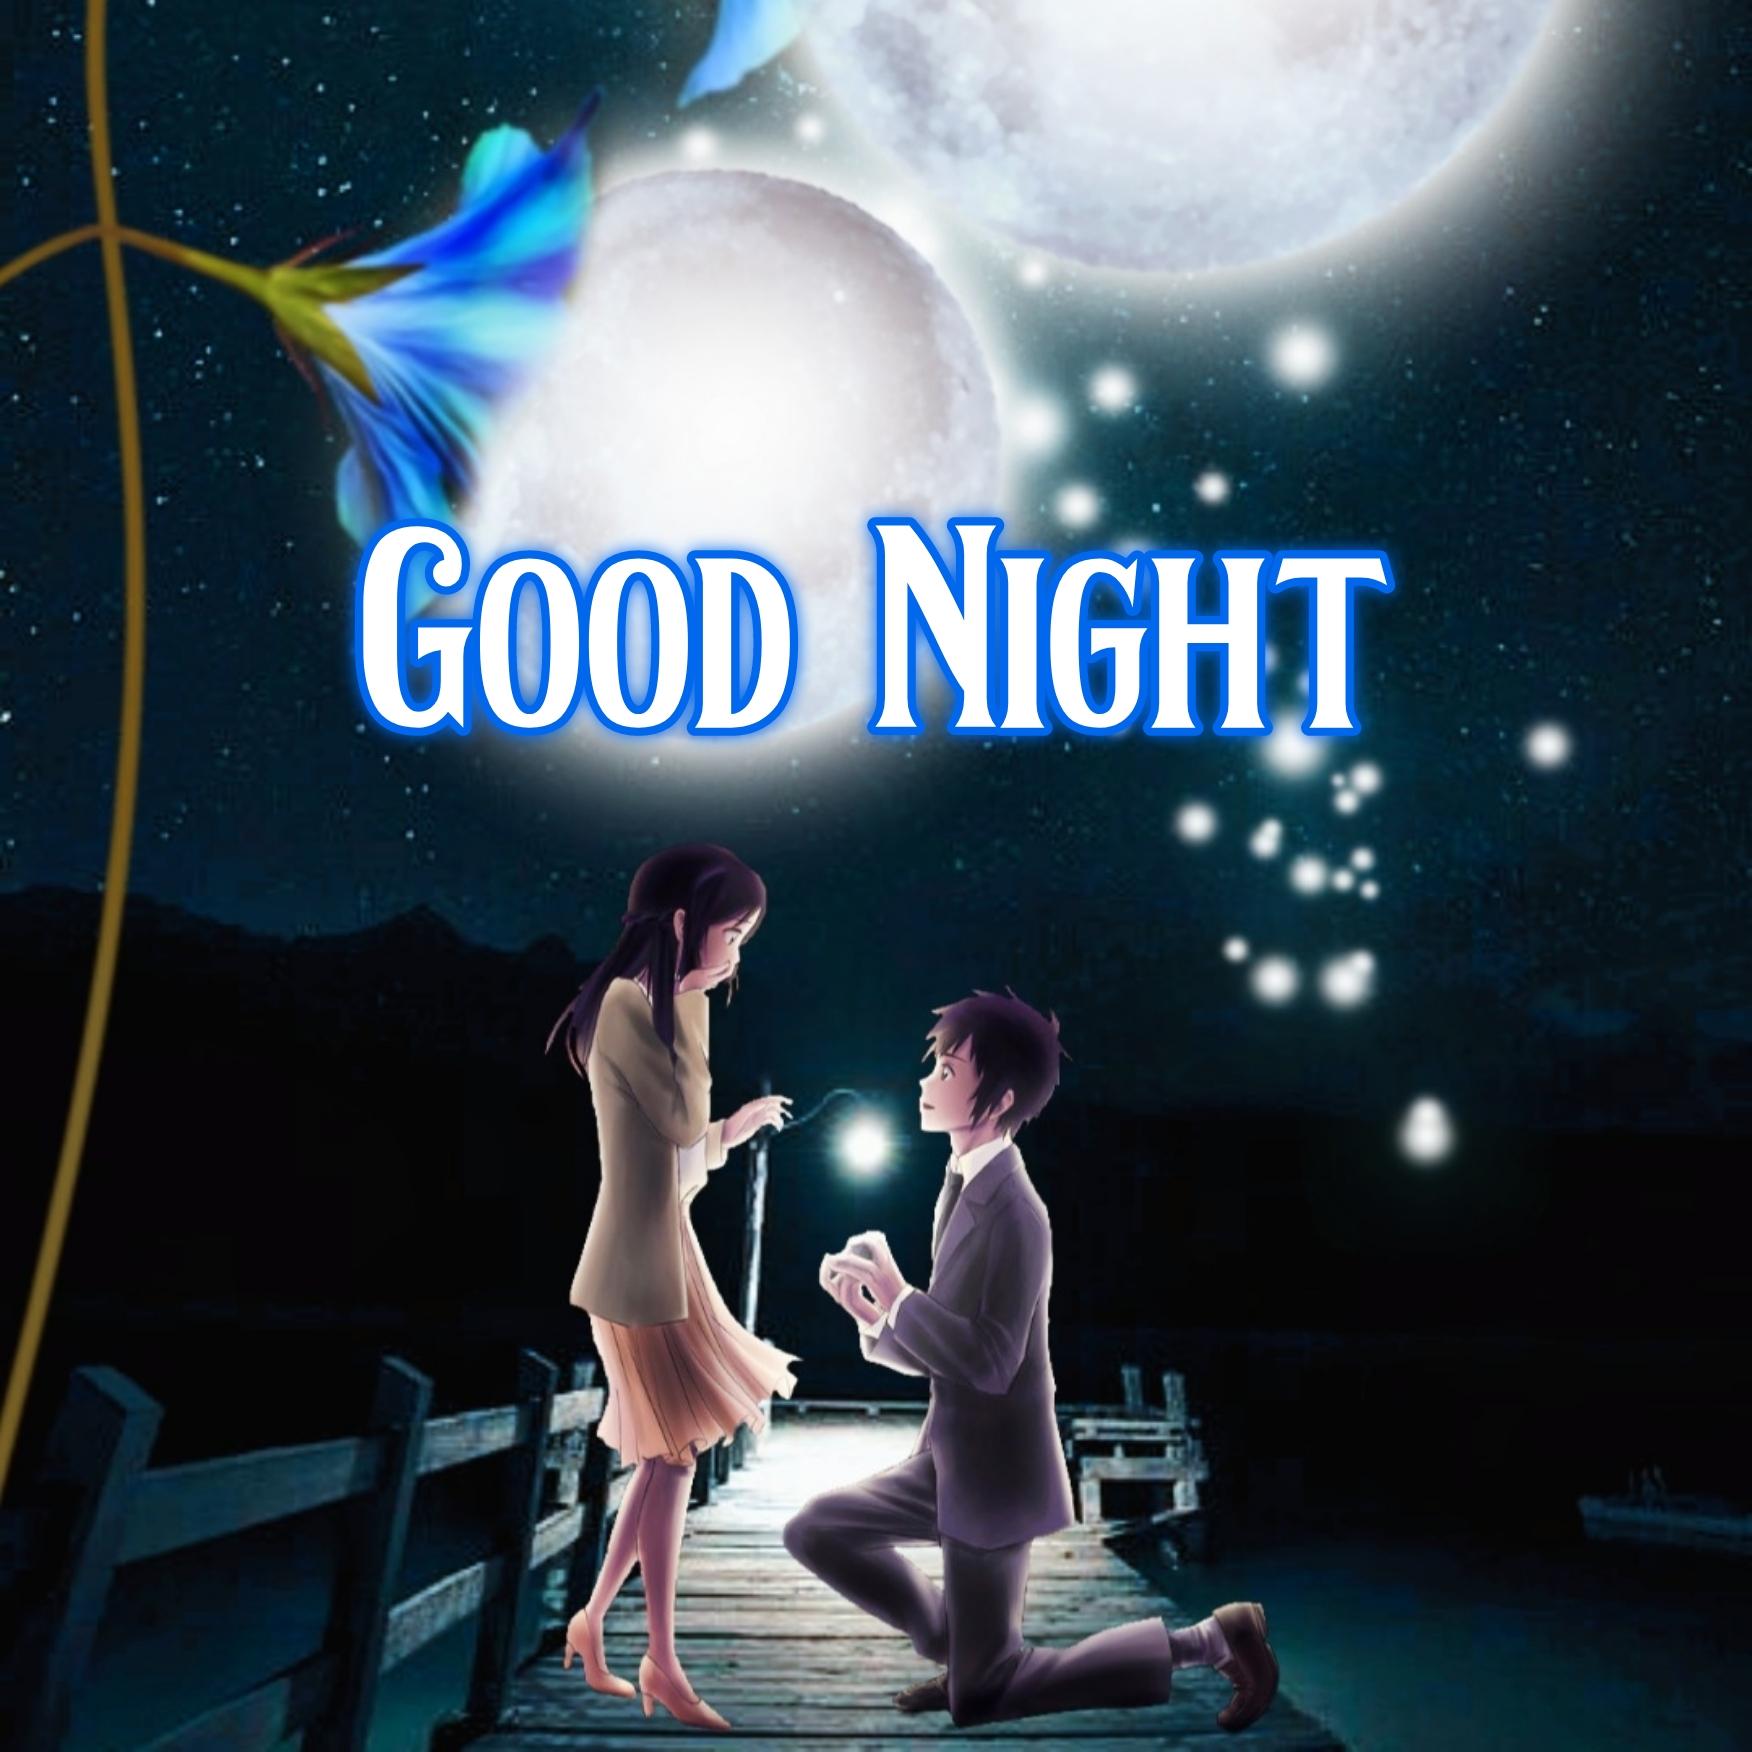 New Romantic Good Night Images 2022 HD Download